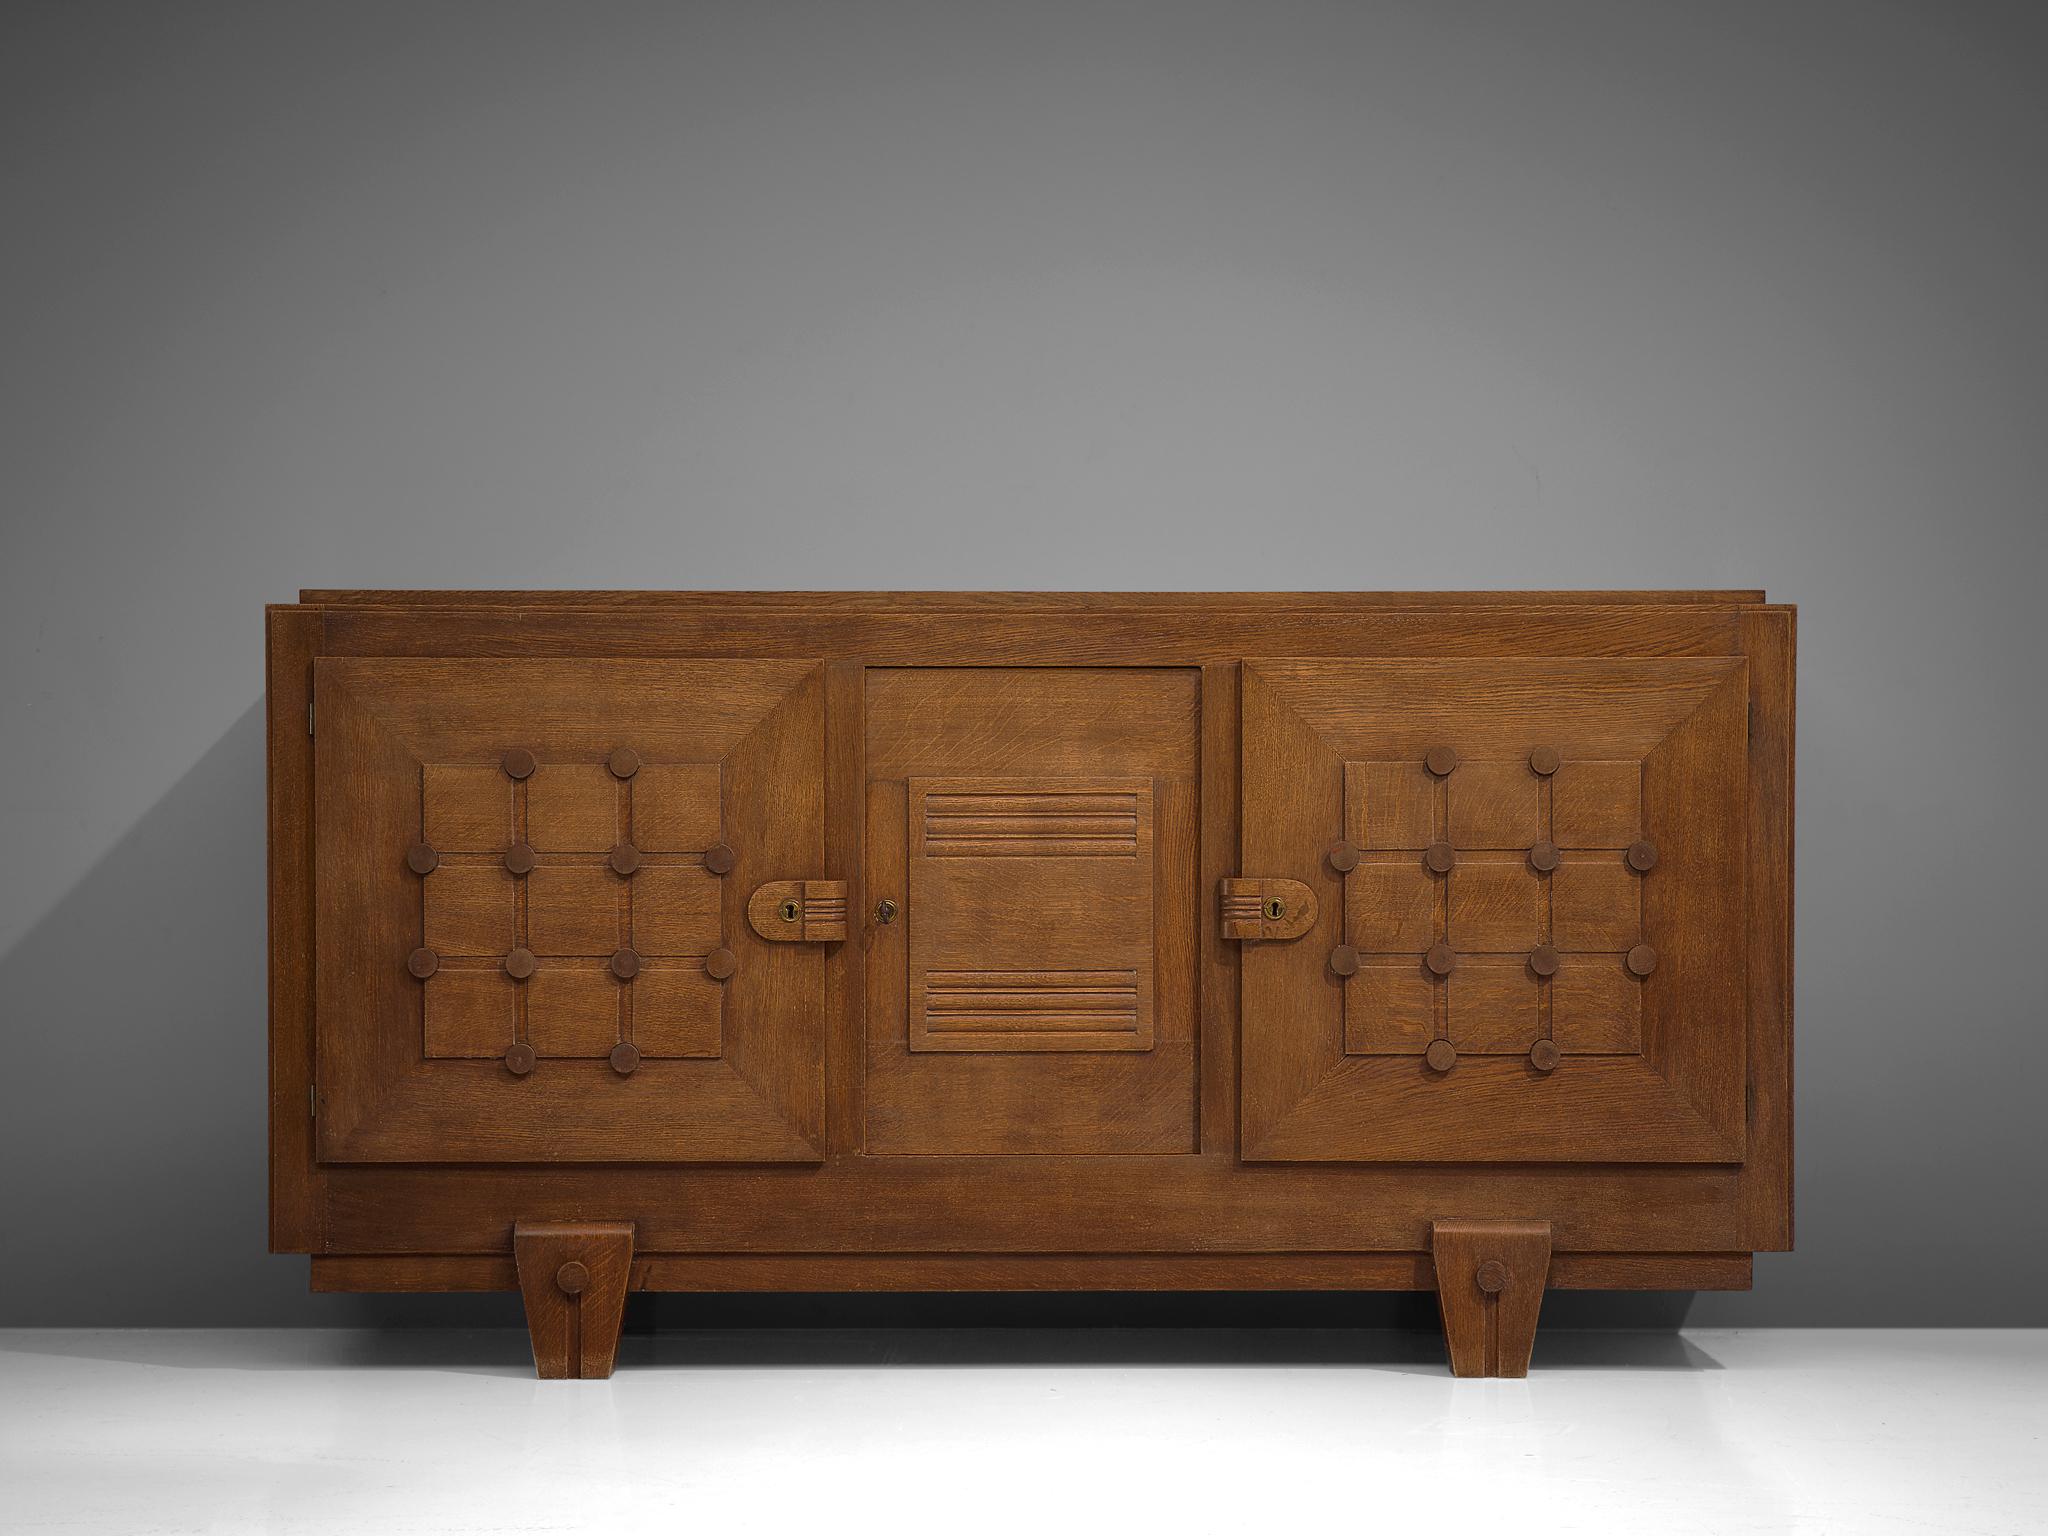 Credenza, oak, France, 1930s.

Sturdy credenza with stunning graphical details in the door panels. Featuring a grid with wooden dots on the intersections, which give this cabinet a vibrant appearance and emphasize its dimensionality. This two-door